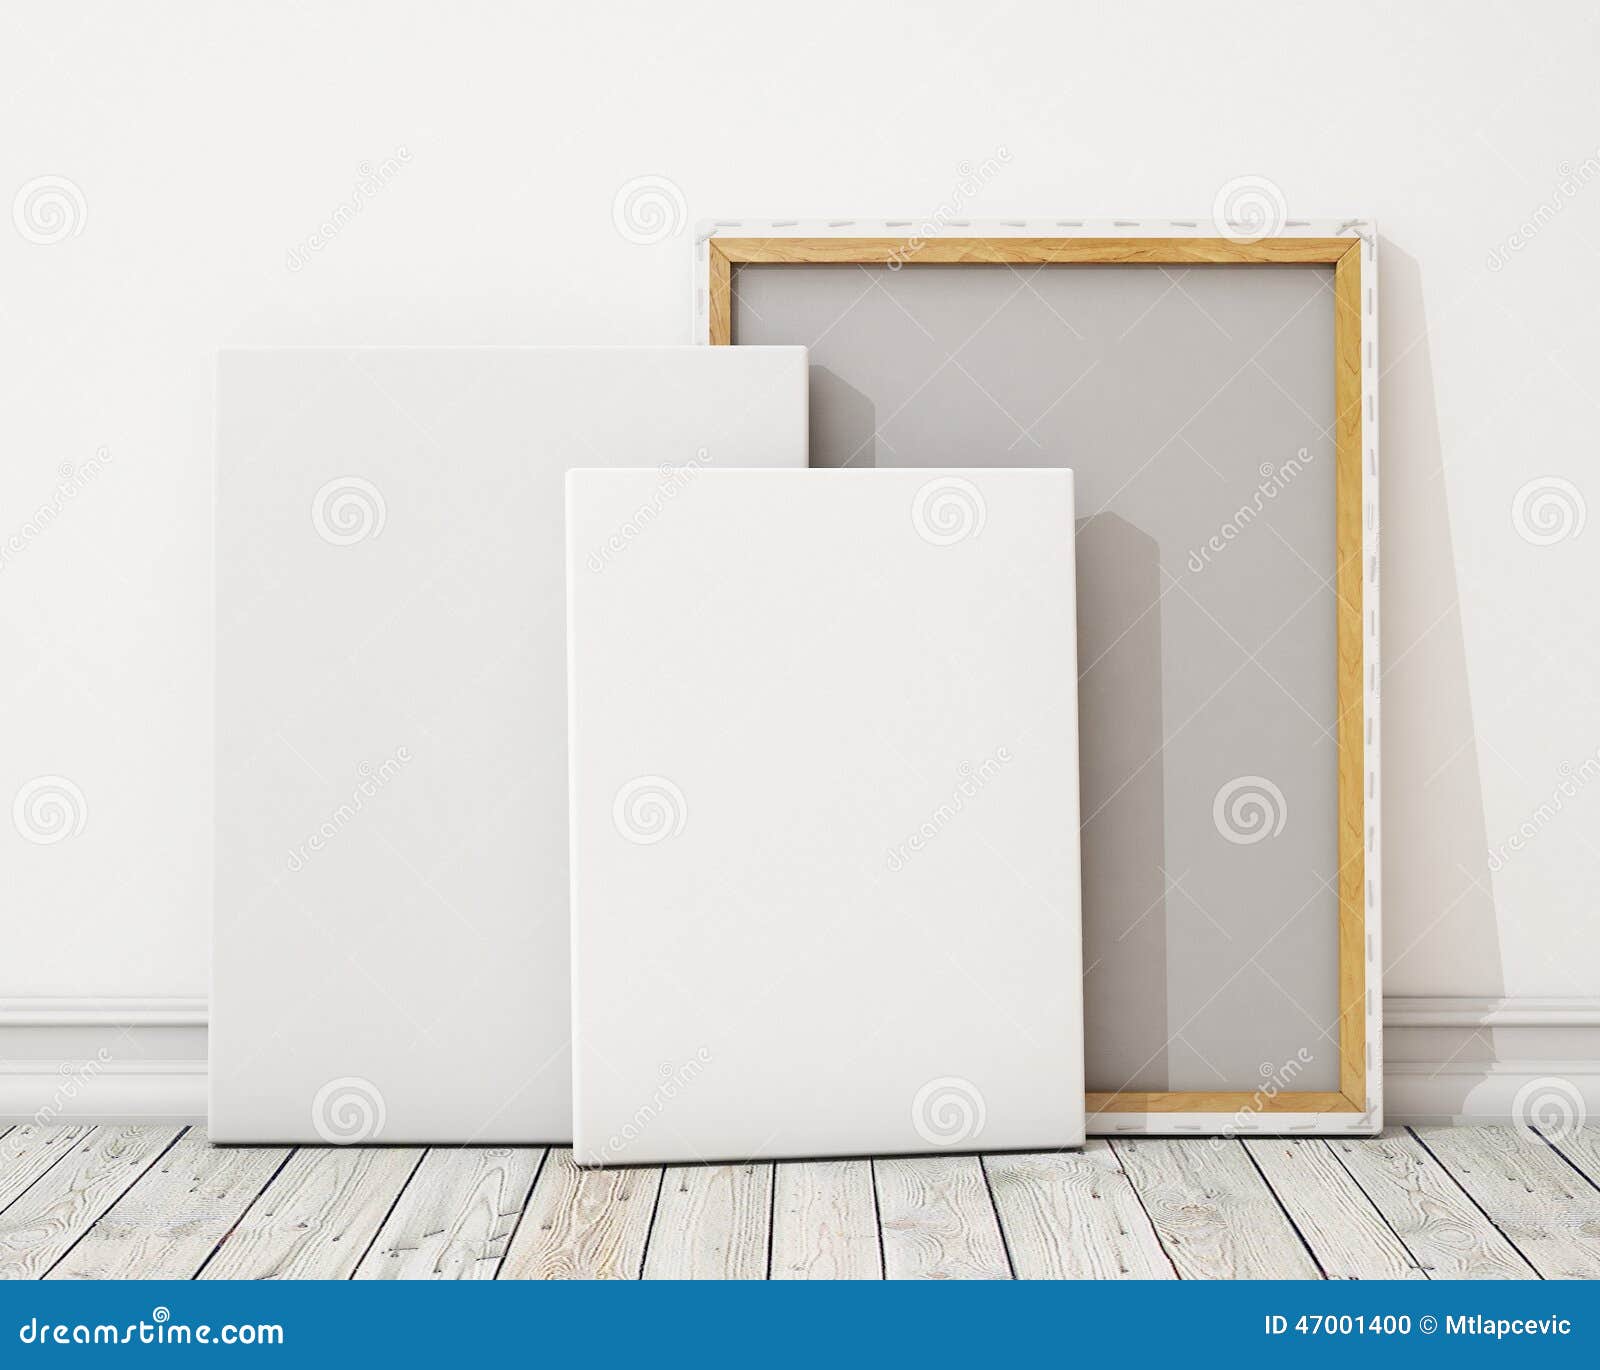 Blank Canvas or Poster with Pile of Canvas on Floor and Wall, Background  Stock Illustration - Illustration of advertising, abstract: 47001400